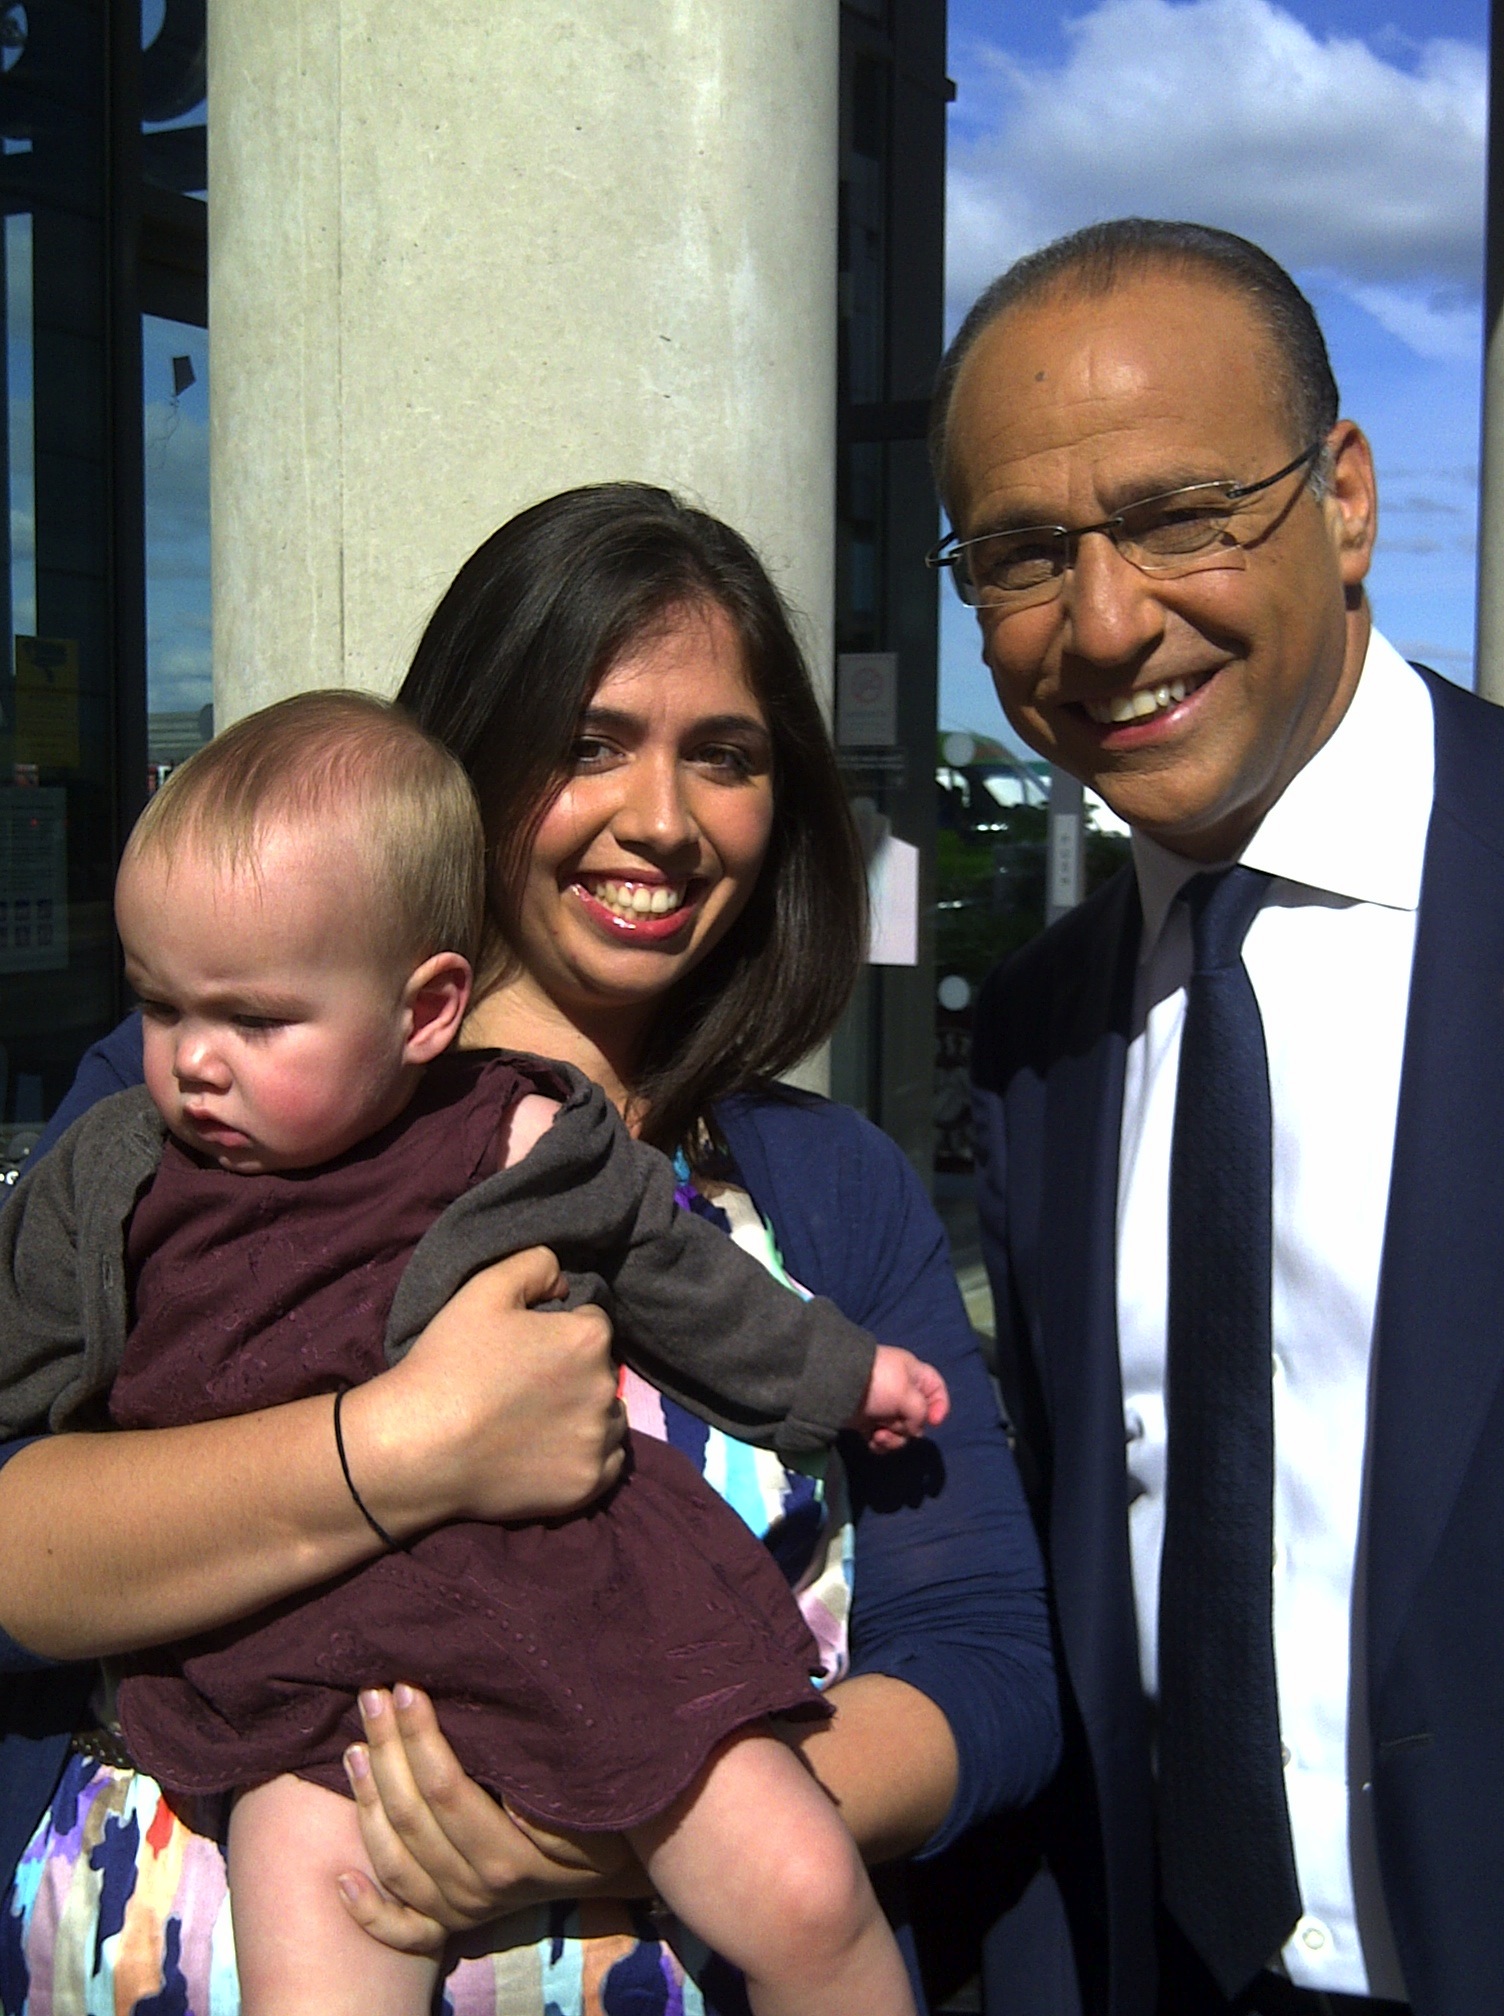 Mummy and Boo with Theo Paphitis